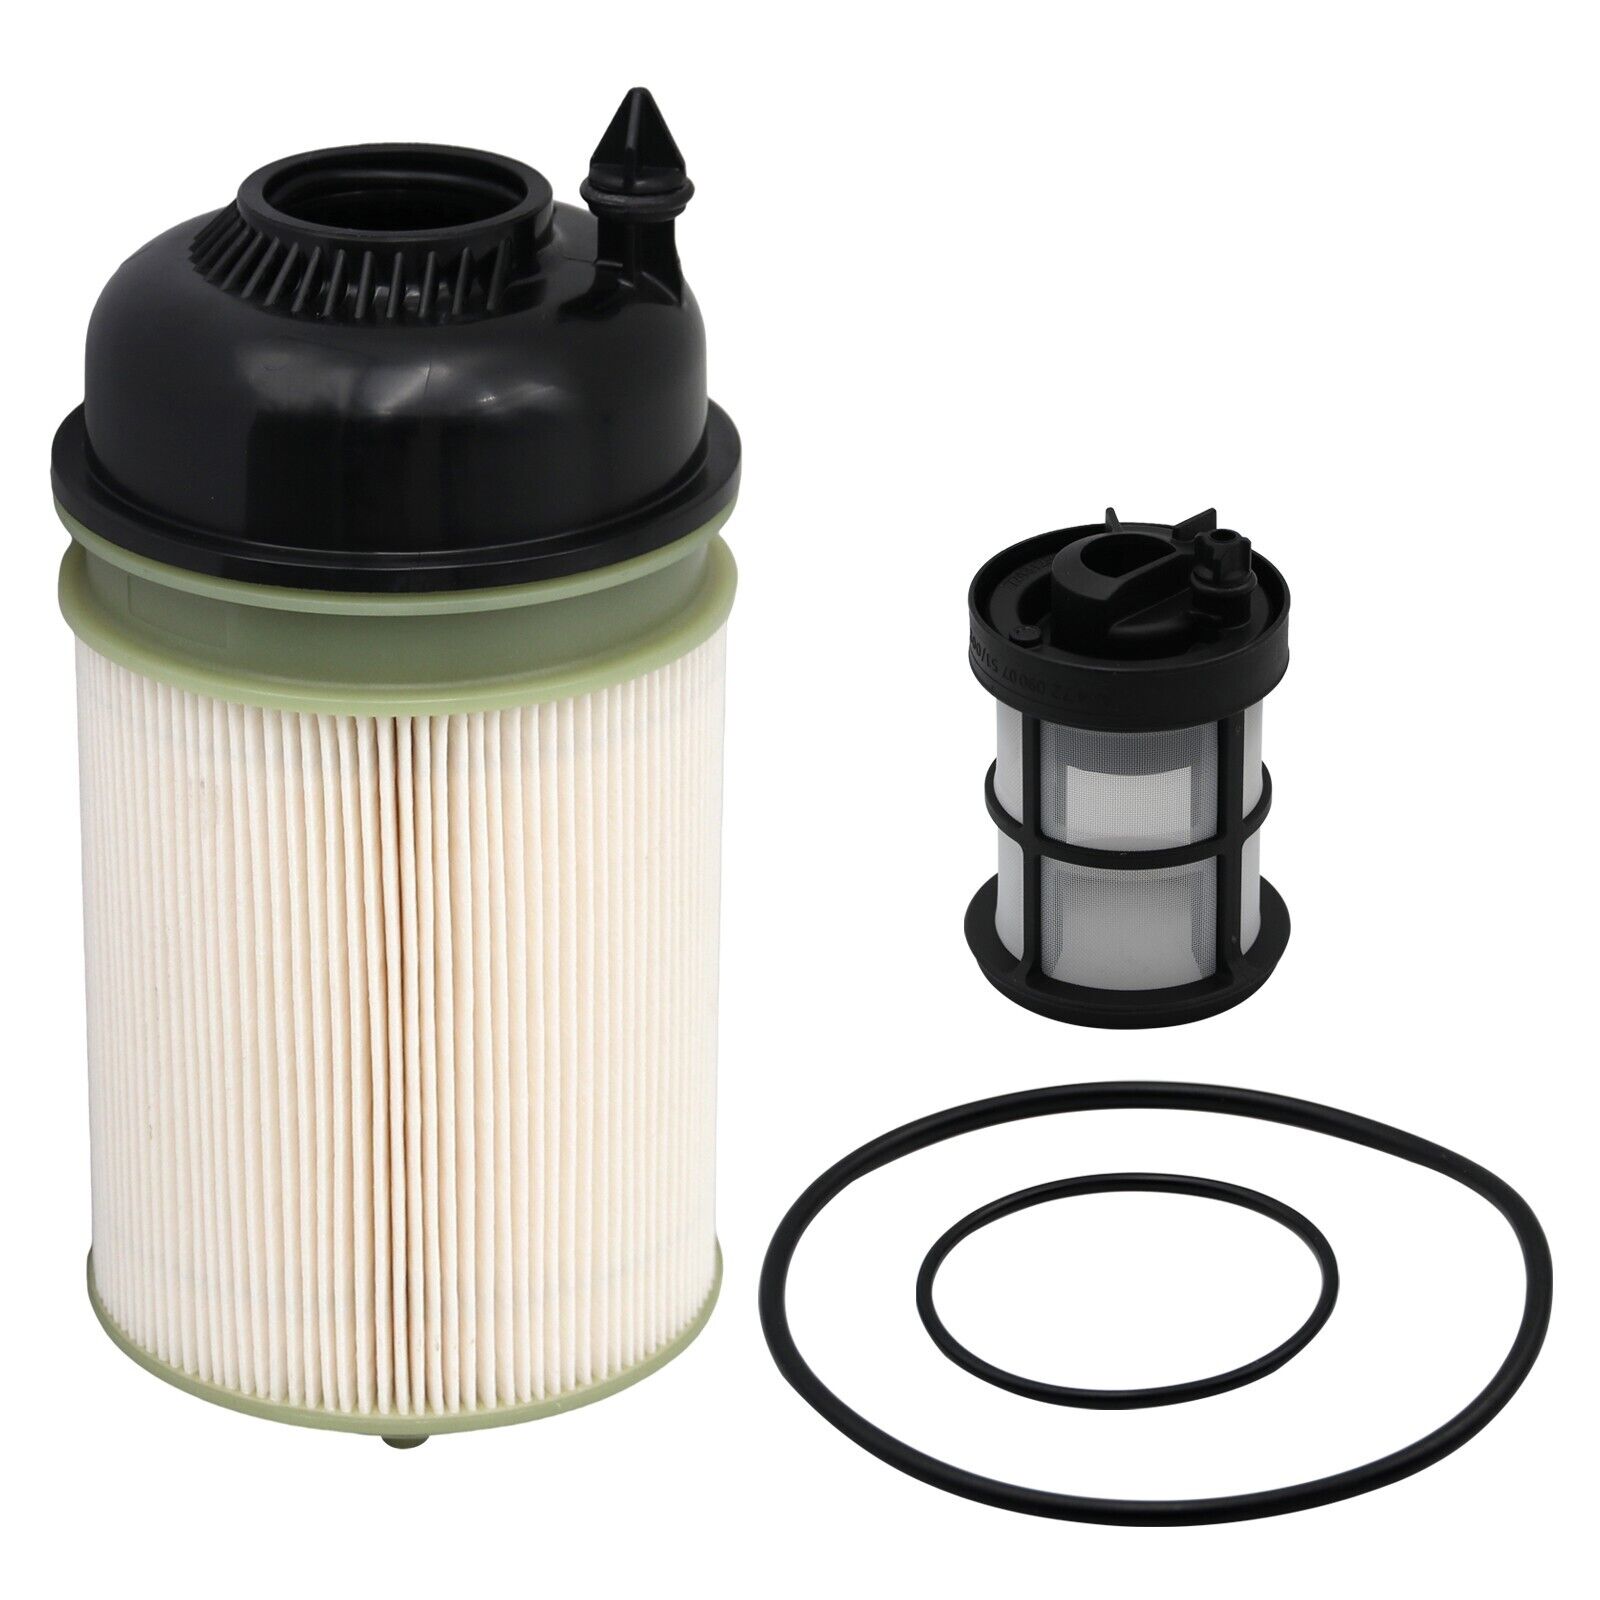 (6X)A4720921705 Fuel Filter Kit, for DD13, DD15 and DD16 Engines